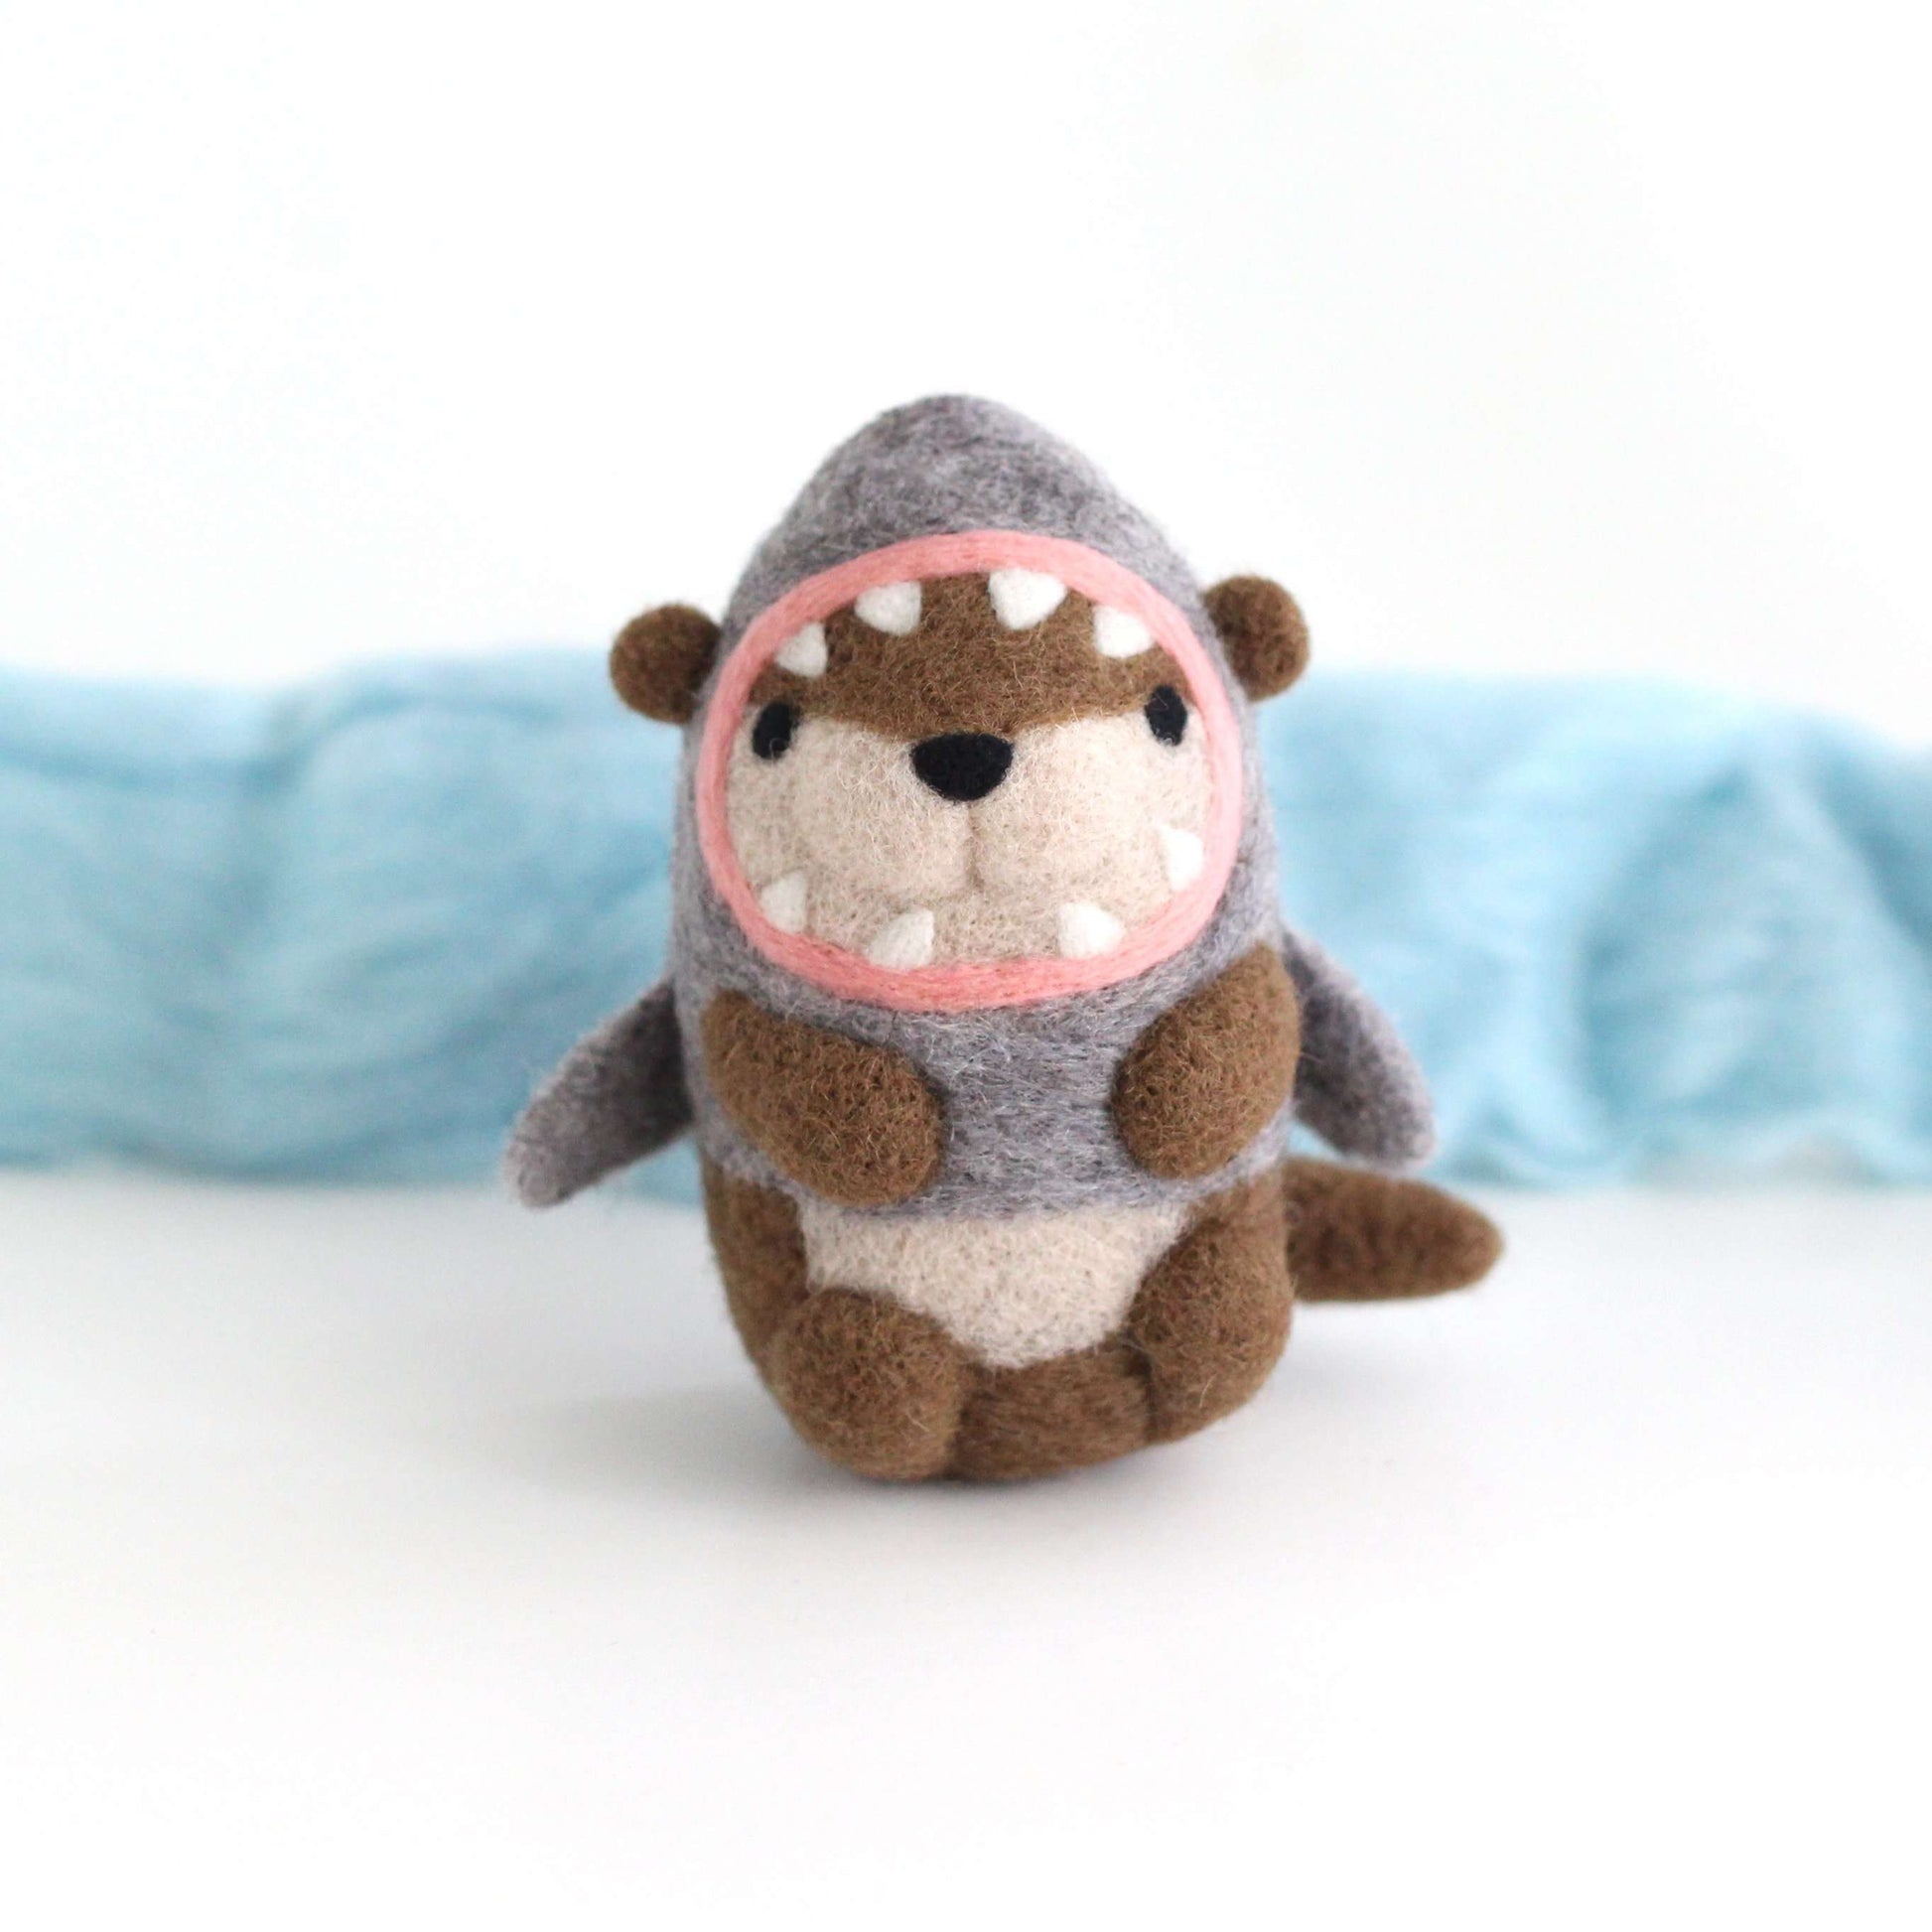 Needle Felted River Otter in a Shark Costume by Wild Whimsy Woolies